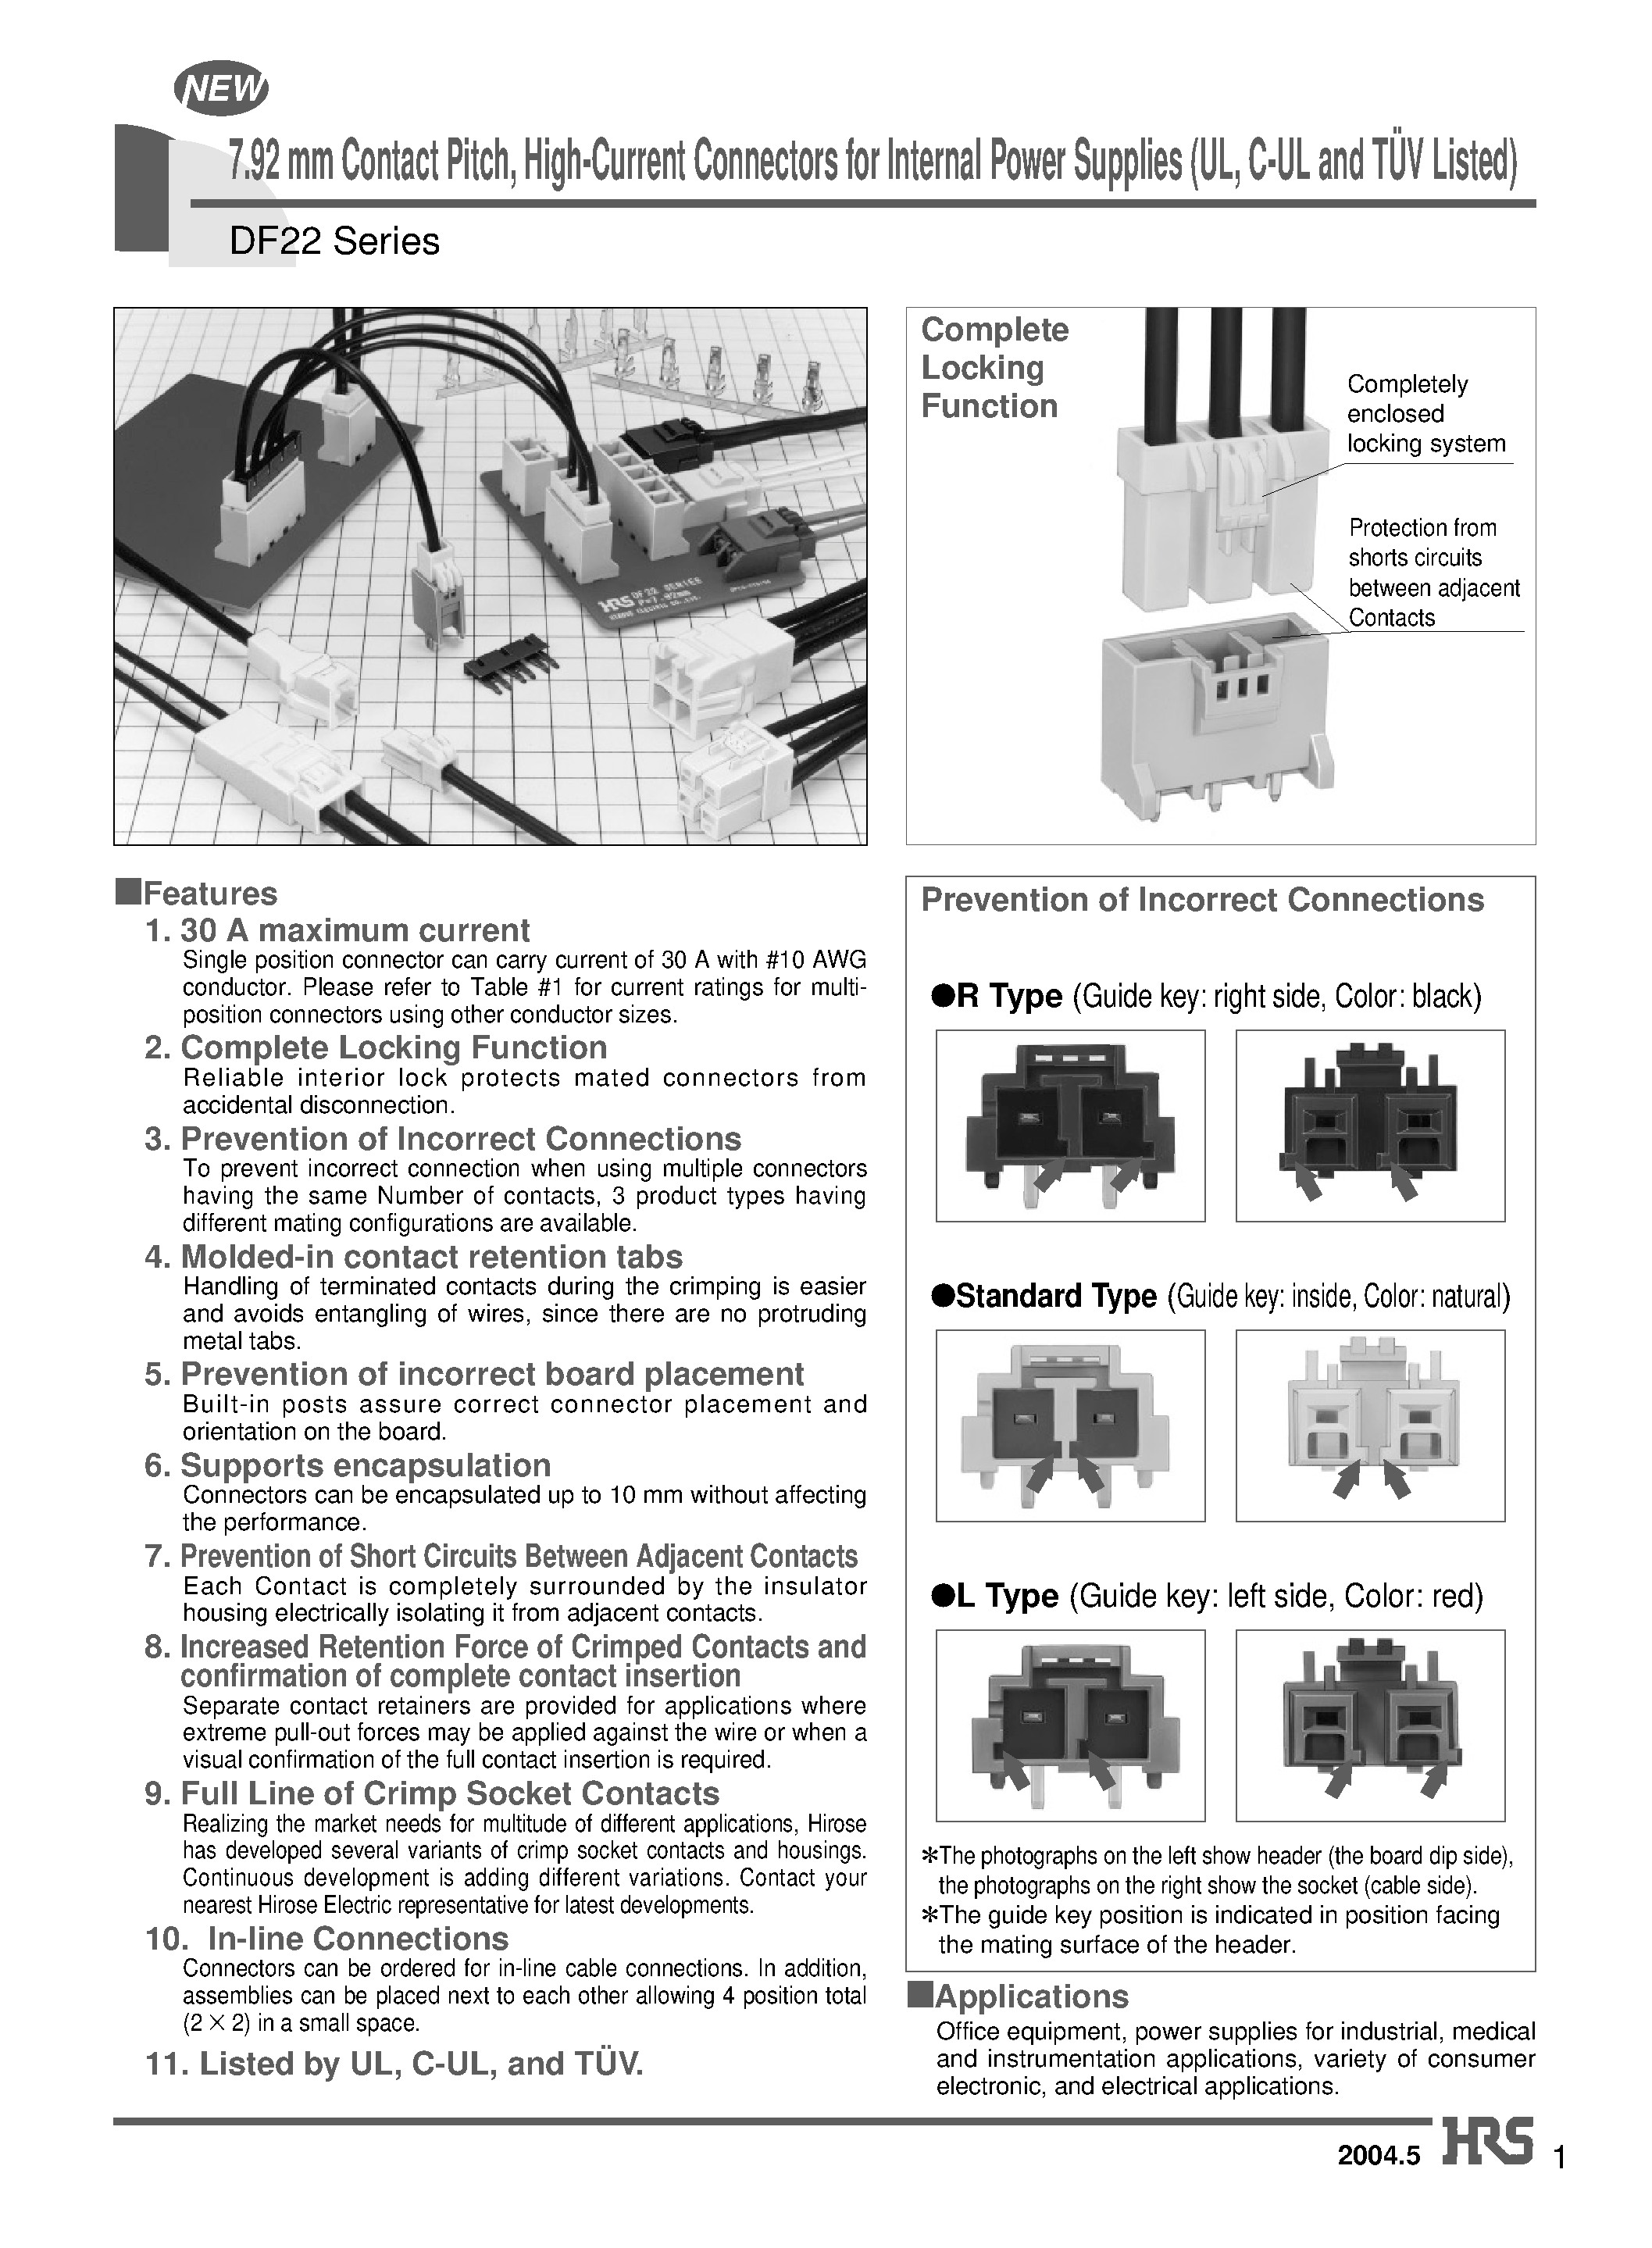 Даташит DF22A-4S-7.92DS - 7.92 mm Contact Pitch/ High-Current Connectors for Internal Power Supplies (UL/ C-UL and TUV Listed) страница 1